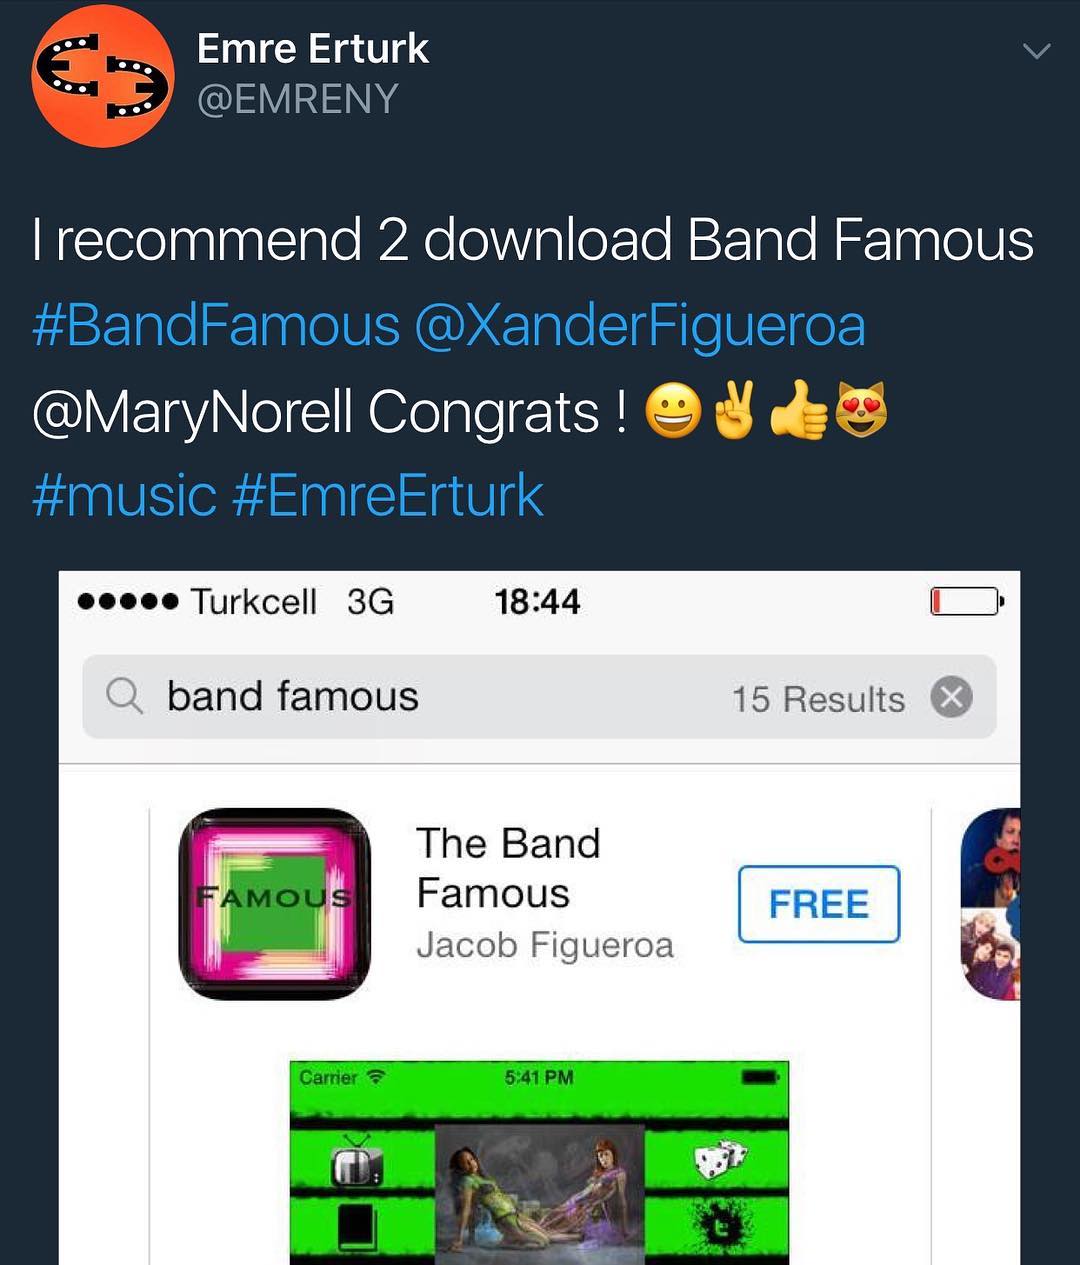 The Band Famous fans rule!